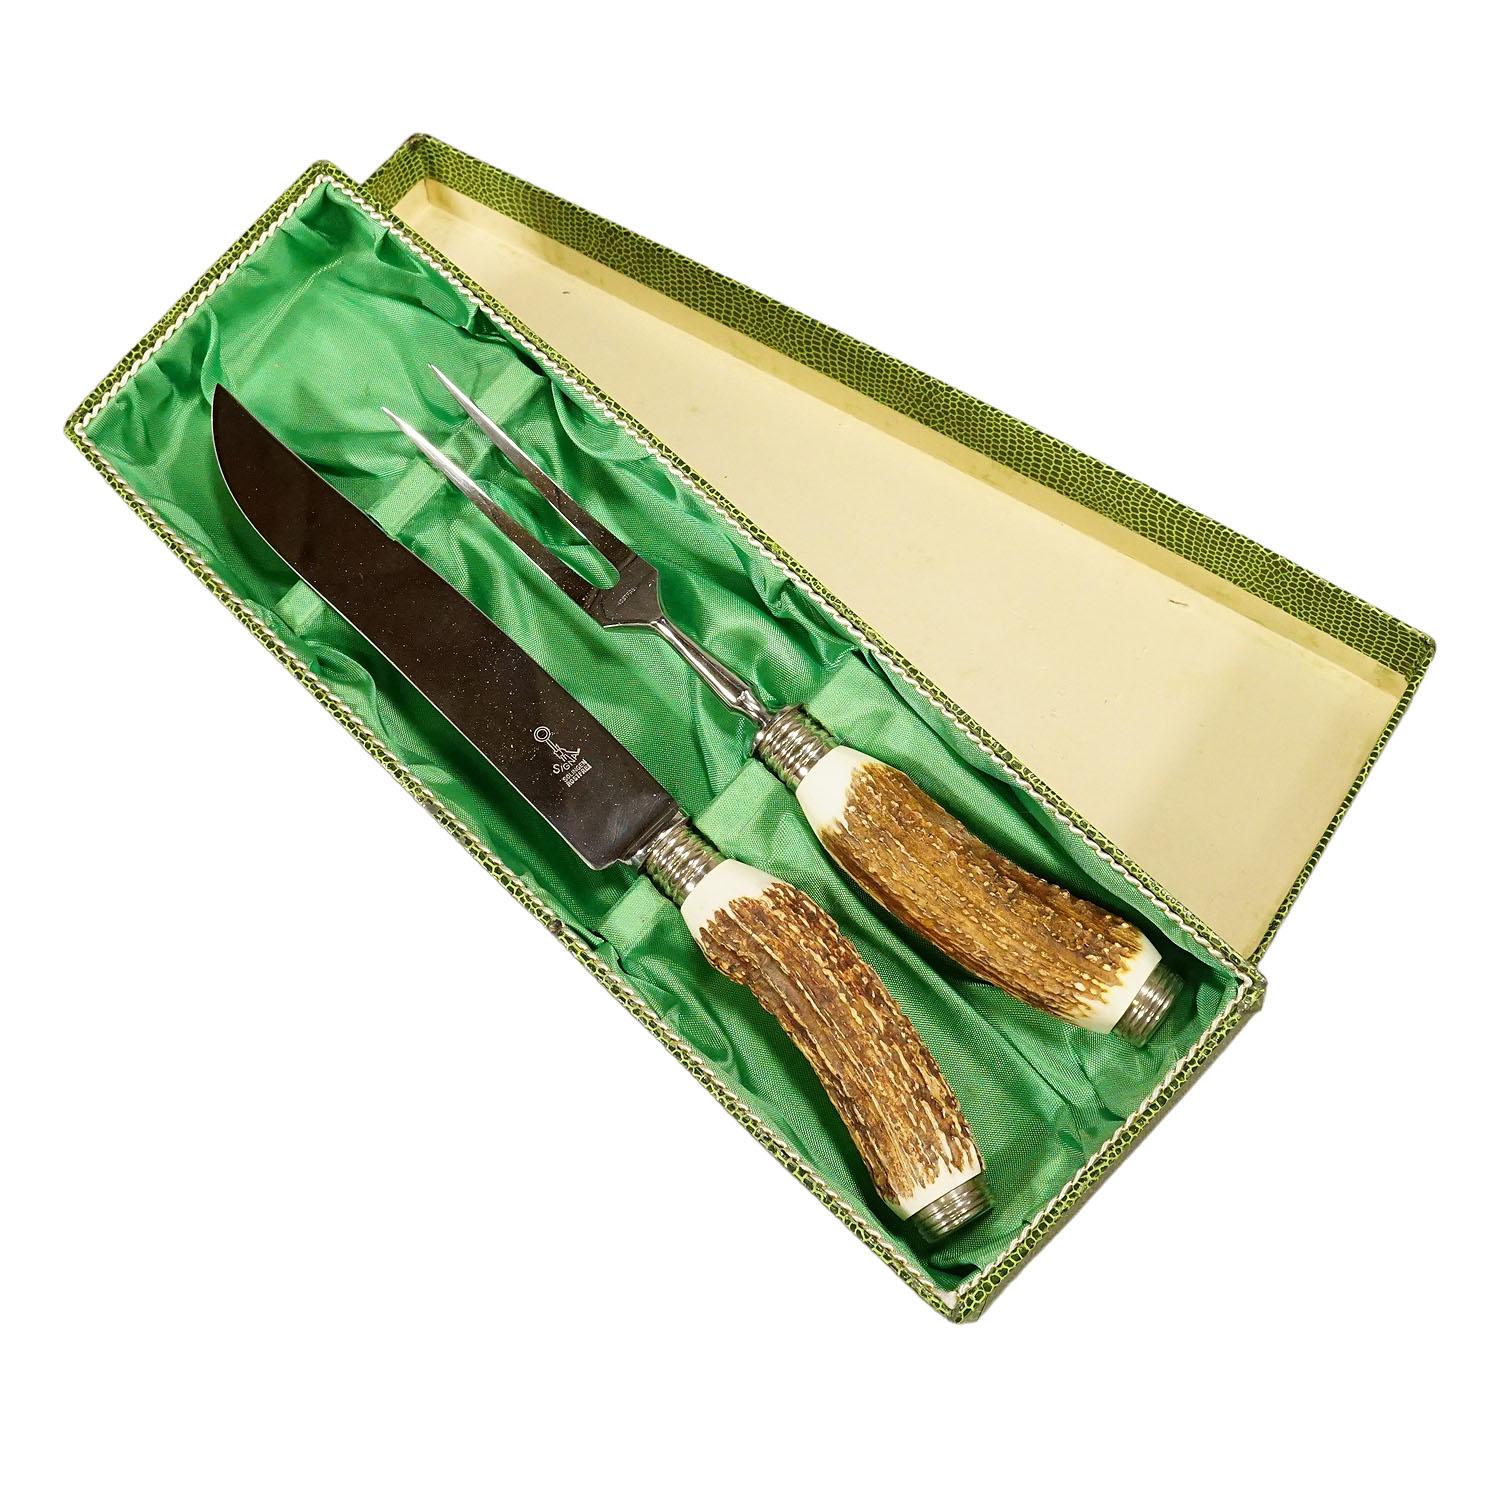 Vintage Stag Horn Carving Set Solingen, Germany

A rustic carving set consisting of fork and knife. The handles are made of genuine stag horn and feature a silver knob on their ends. Blade and fork made of stainles steel. The set comes with its